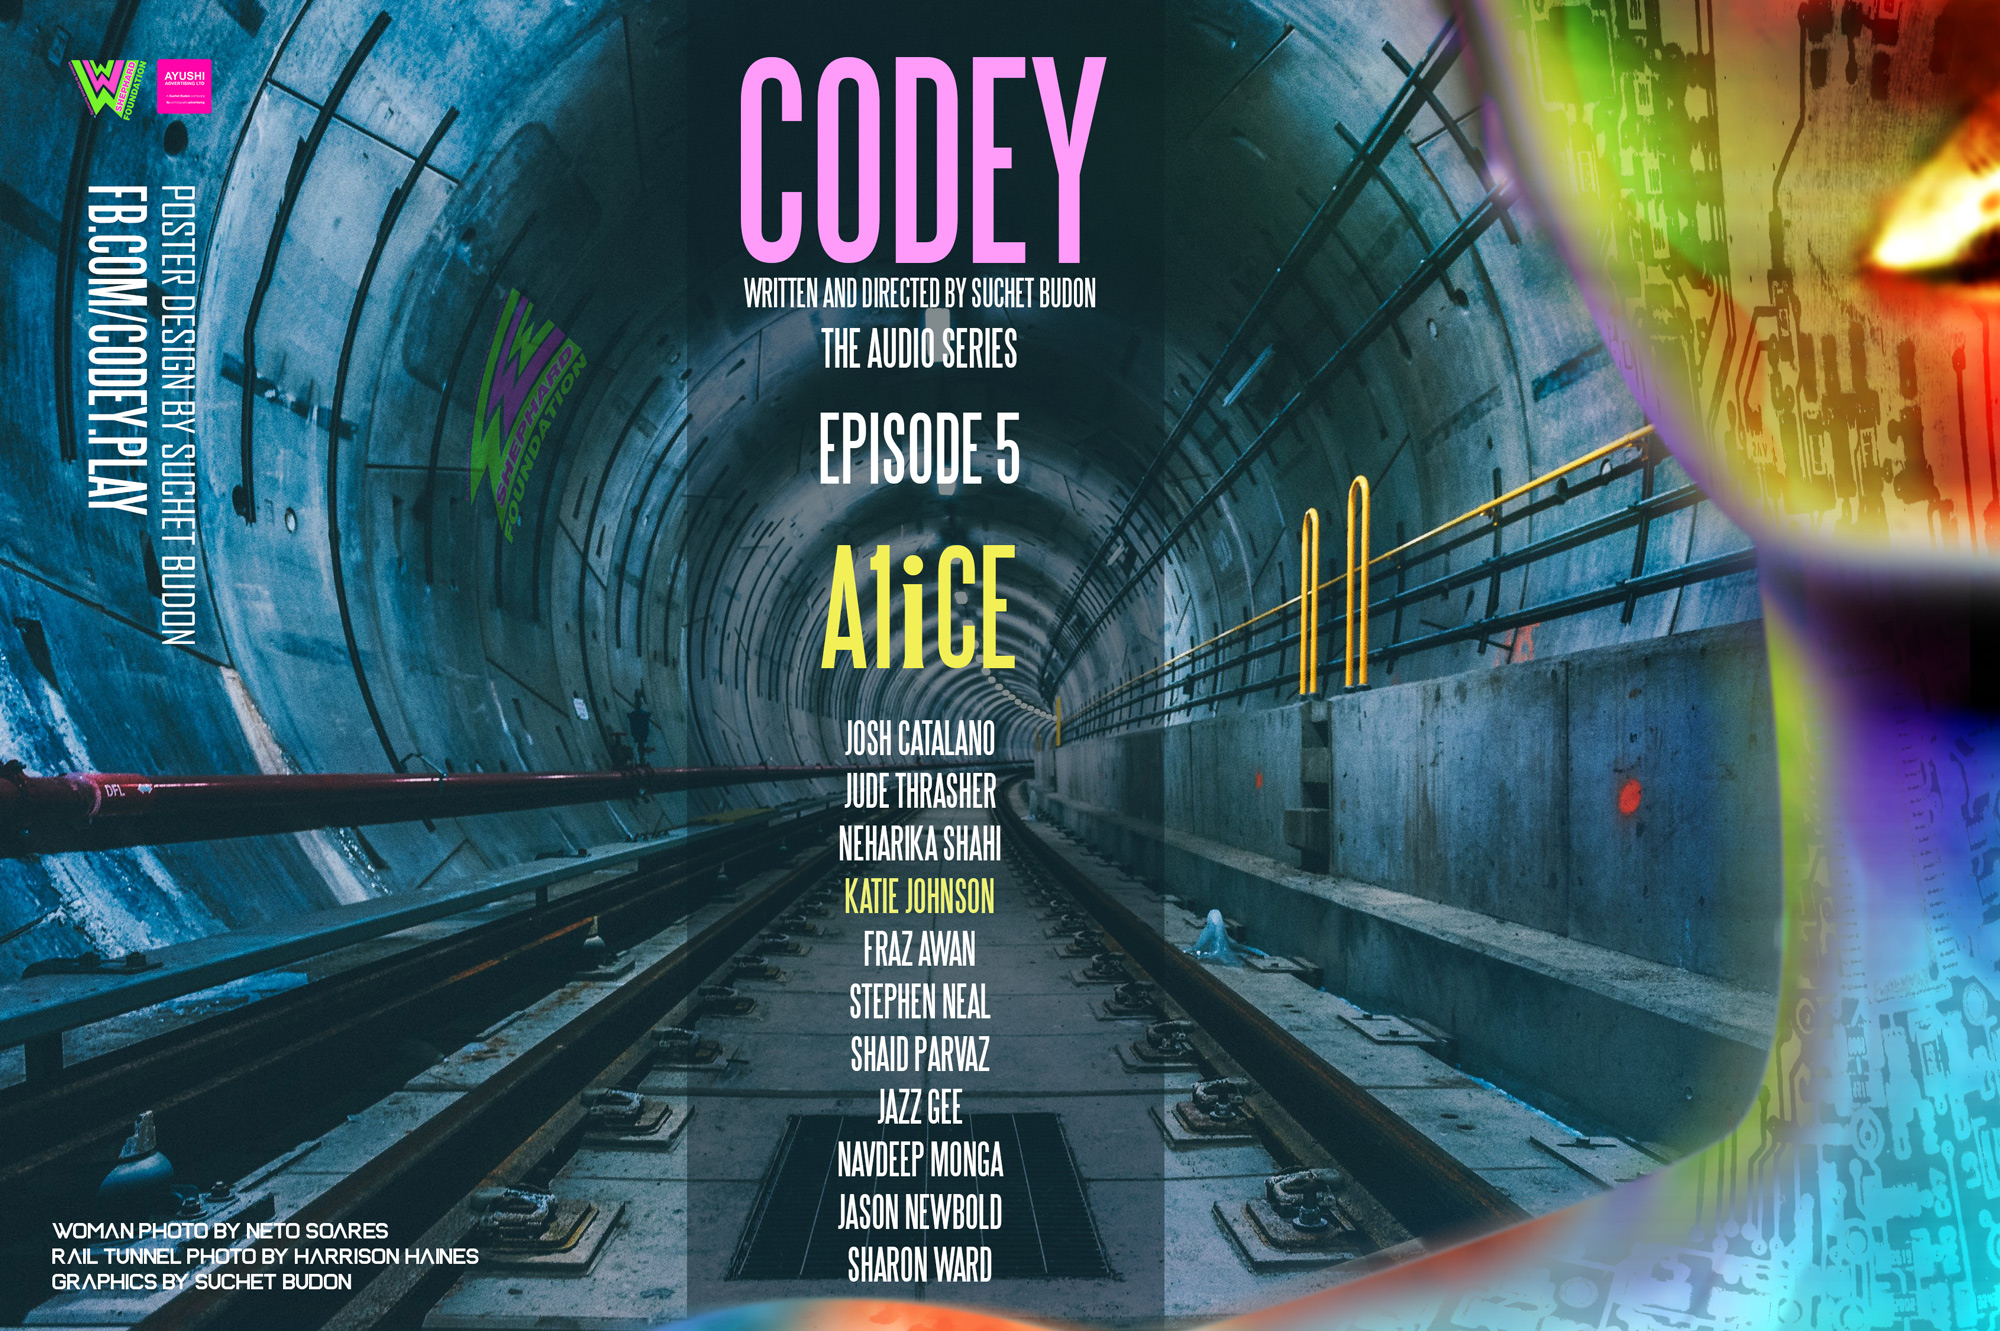 A poster image depicting a cyborg lady and a railway tunnel behind her. It's the poster for CODEY EPISODE 5: ALICE. Katie Johnson plays the role of Alice in the CODEY audio series.